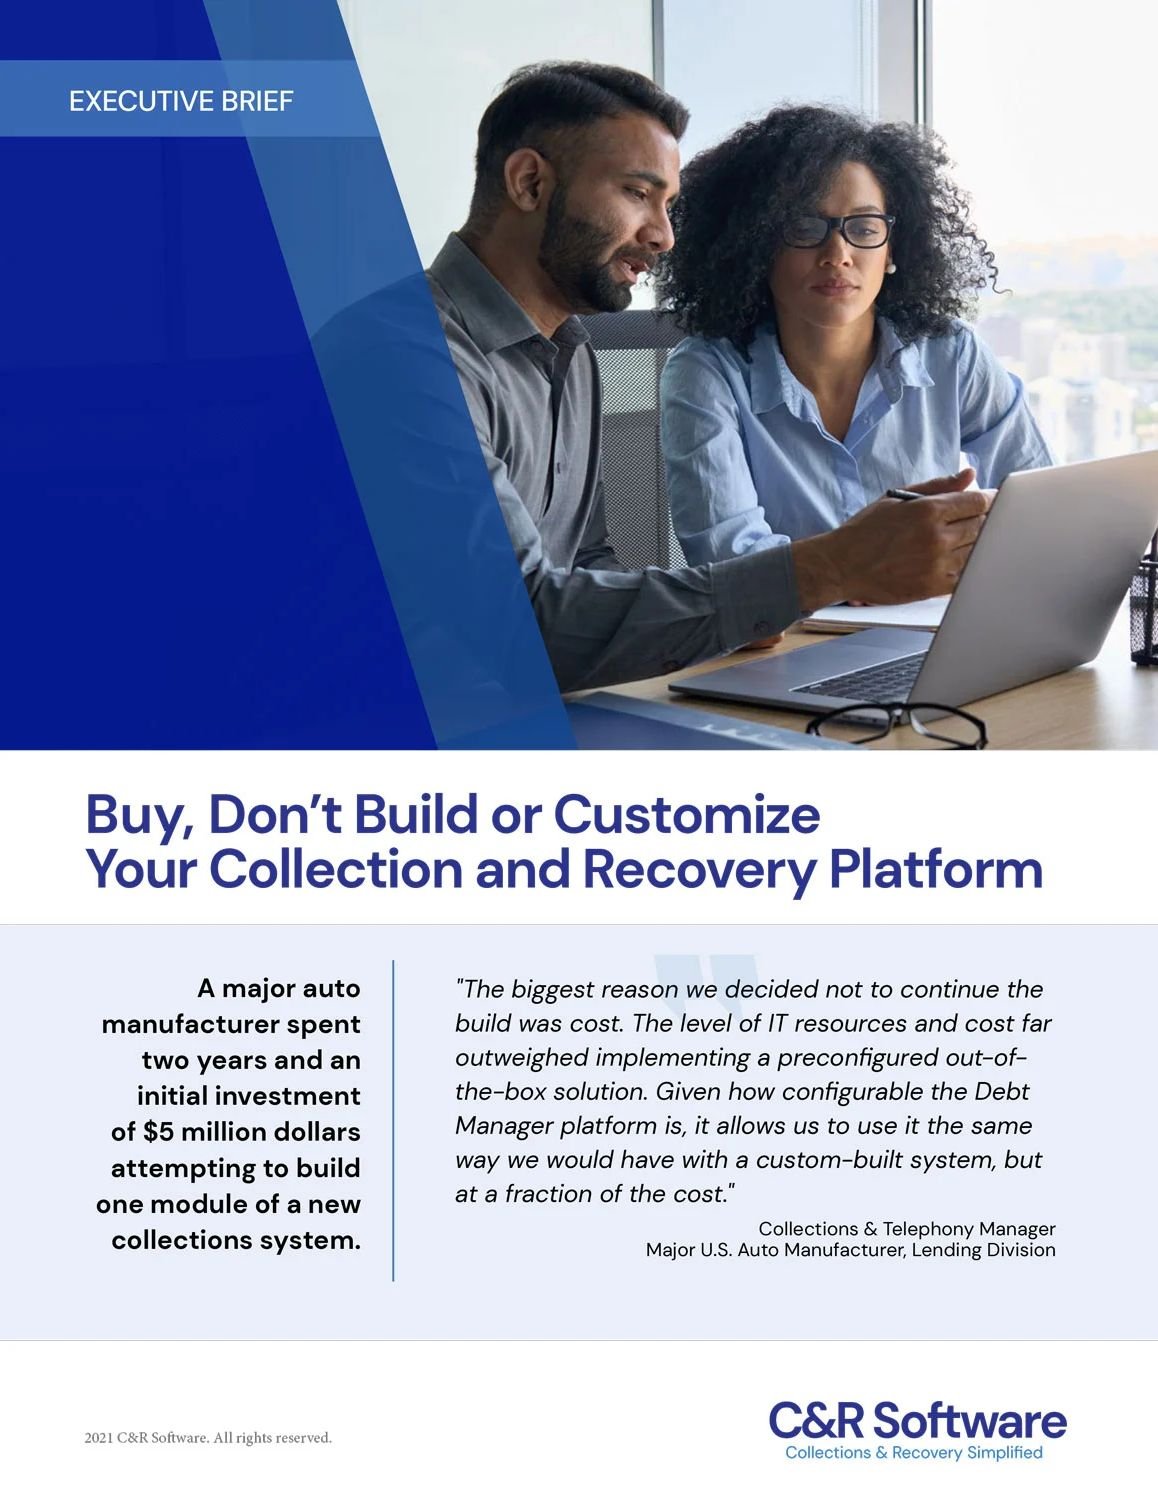 Executive-Brief-Buy-Dont-Build-or-Customize-Your-Collection-and-Recovery-Platform-1